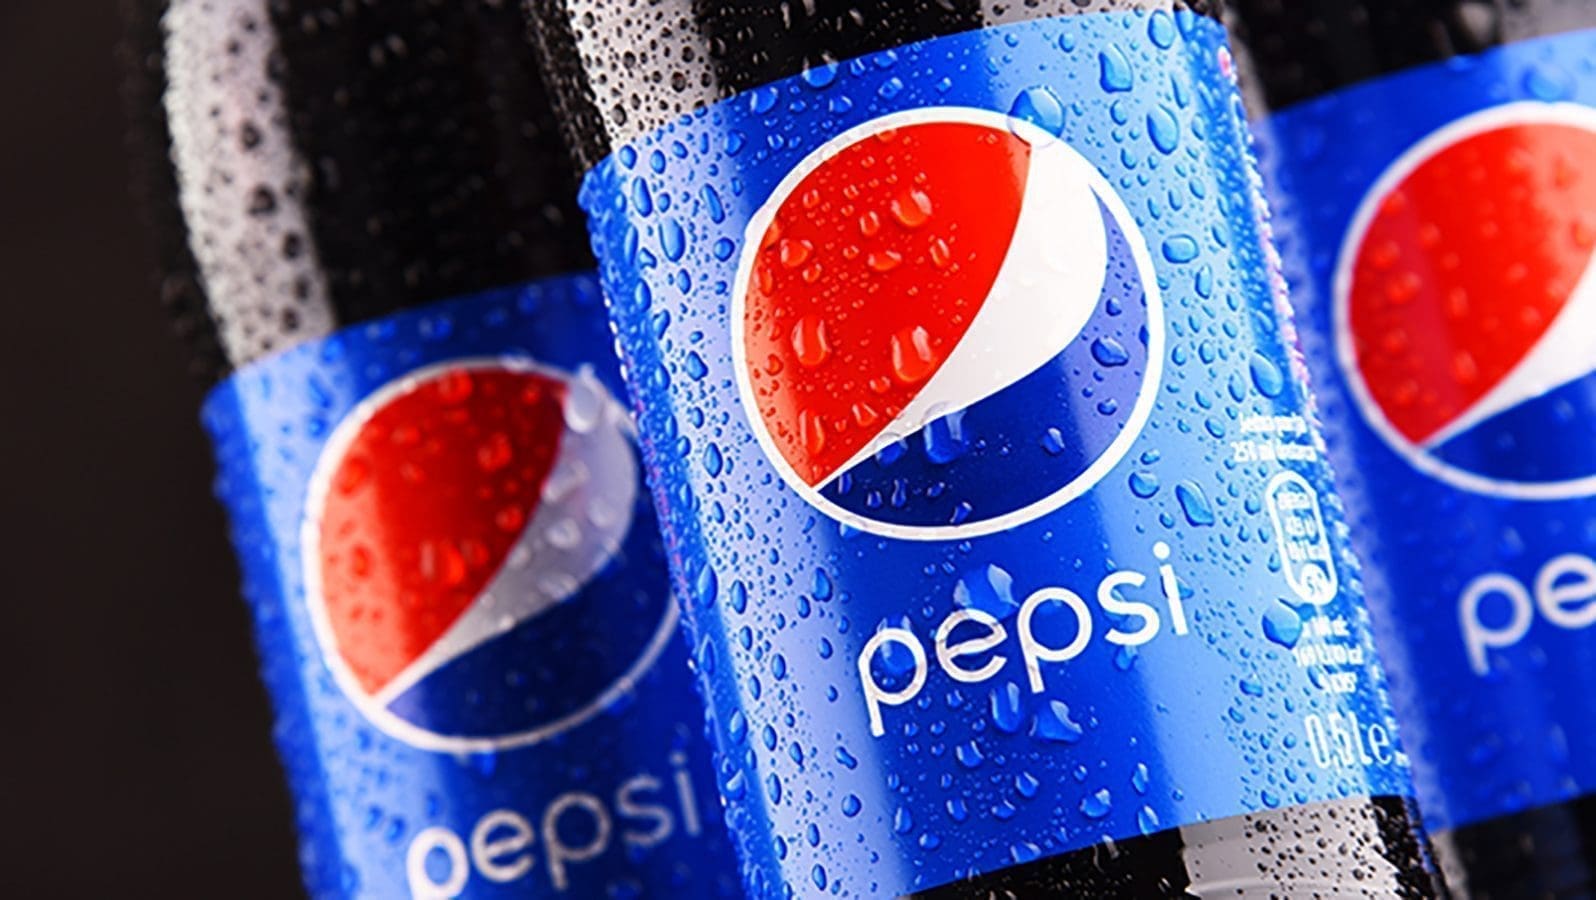 PepsiCo commits to scaling reusable packaging options